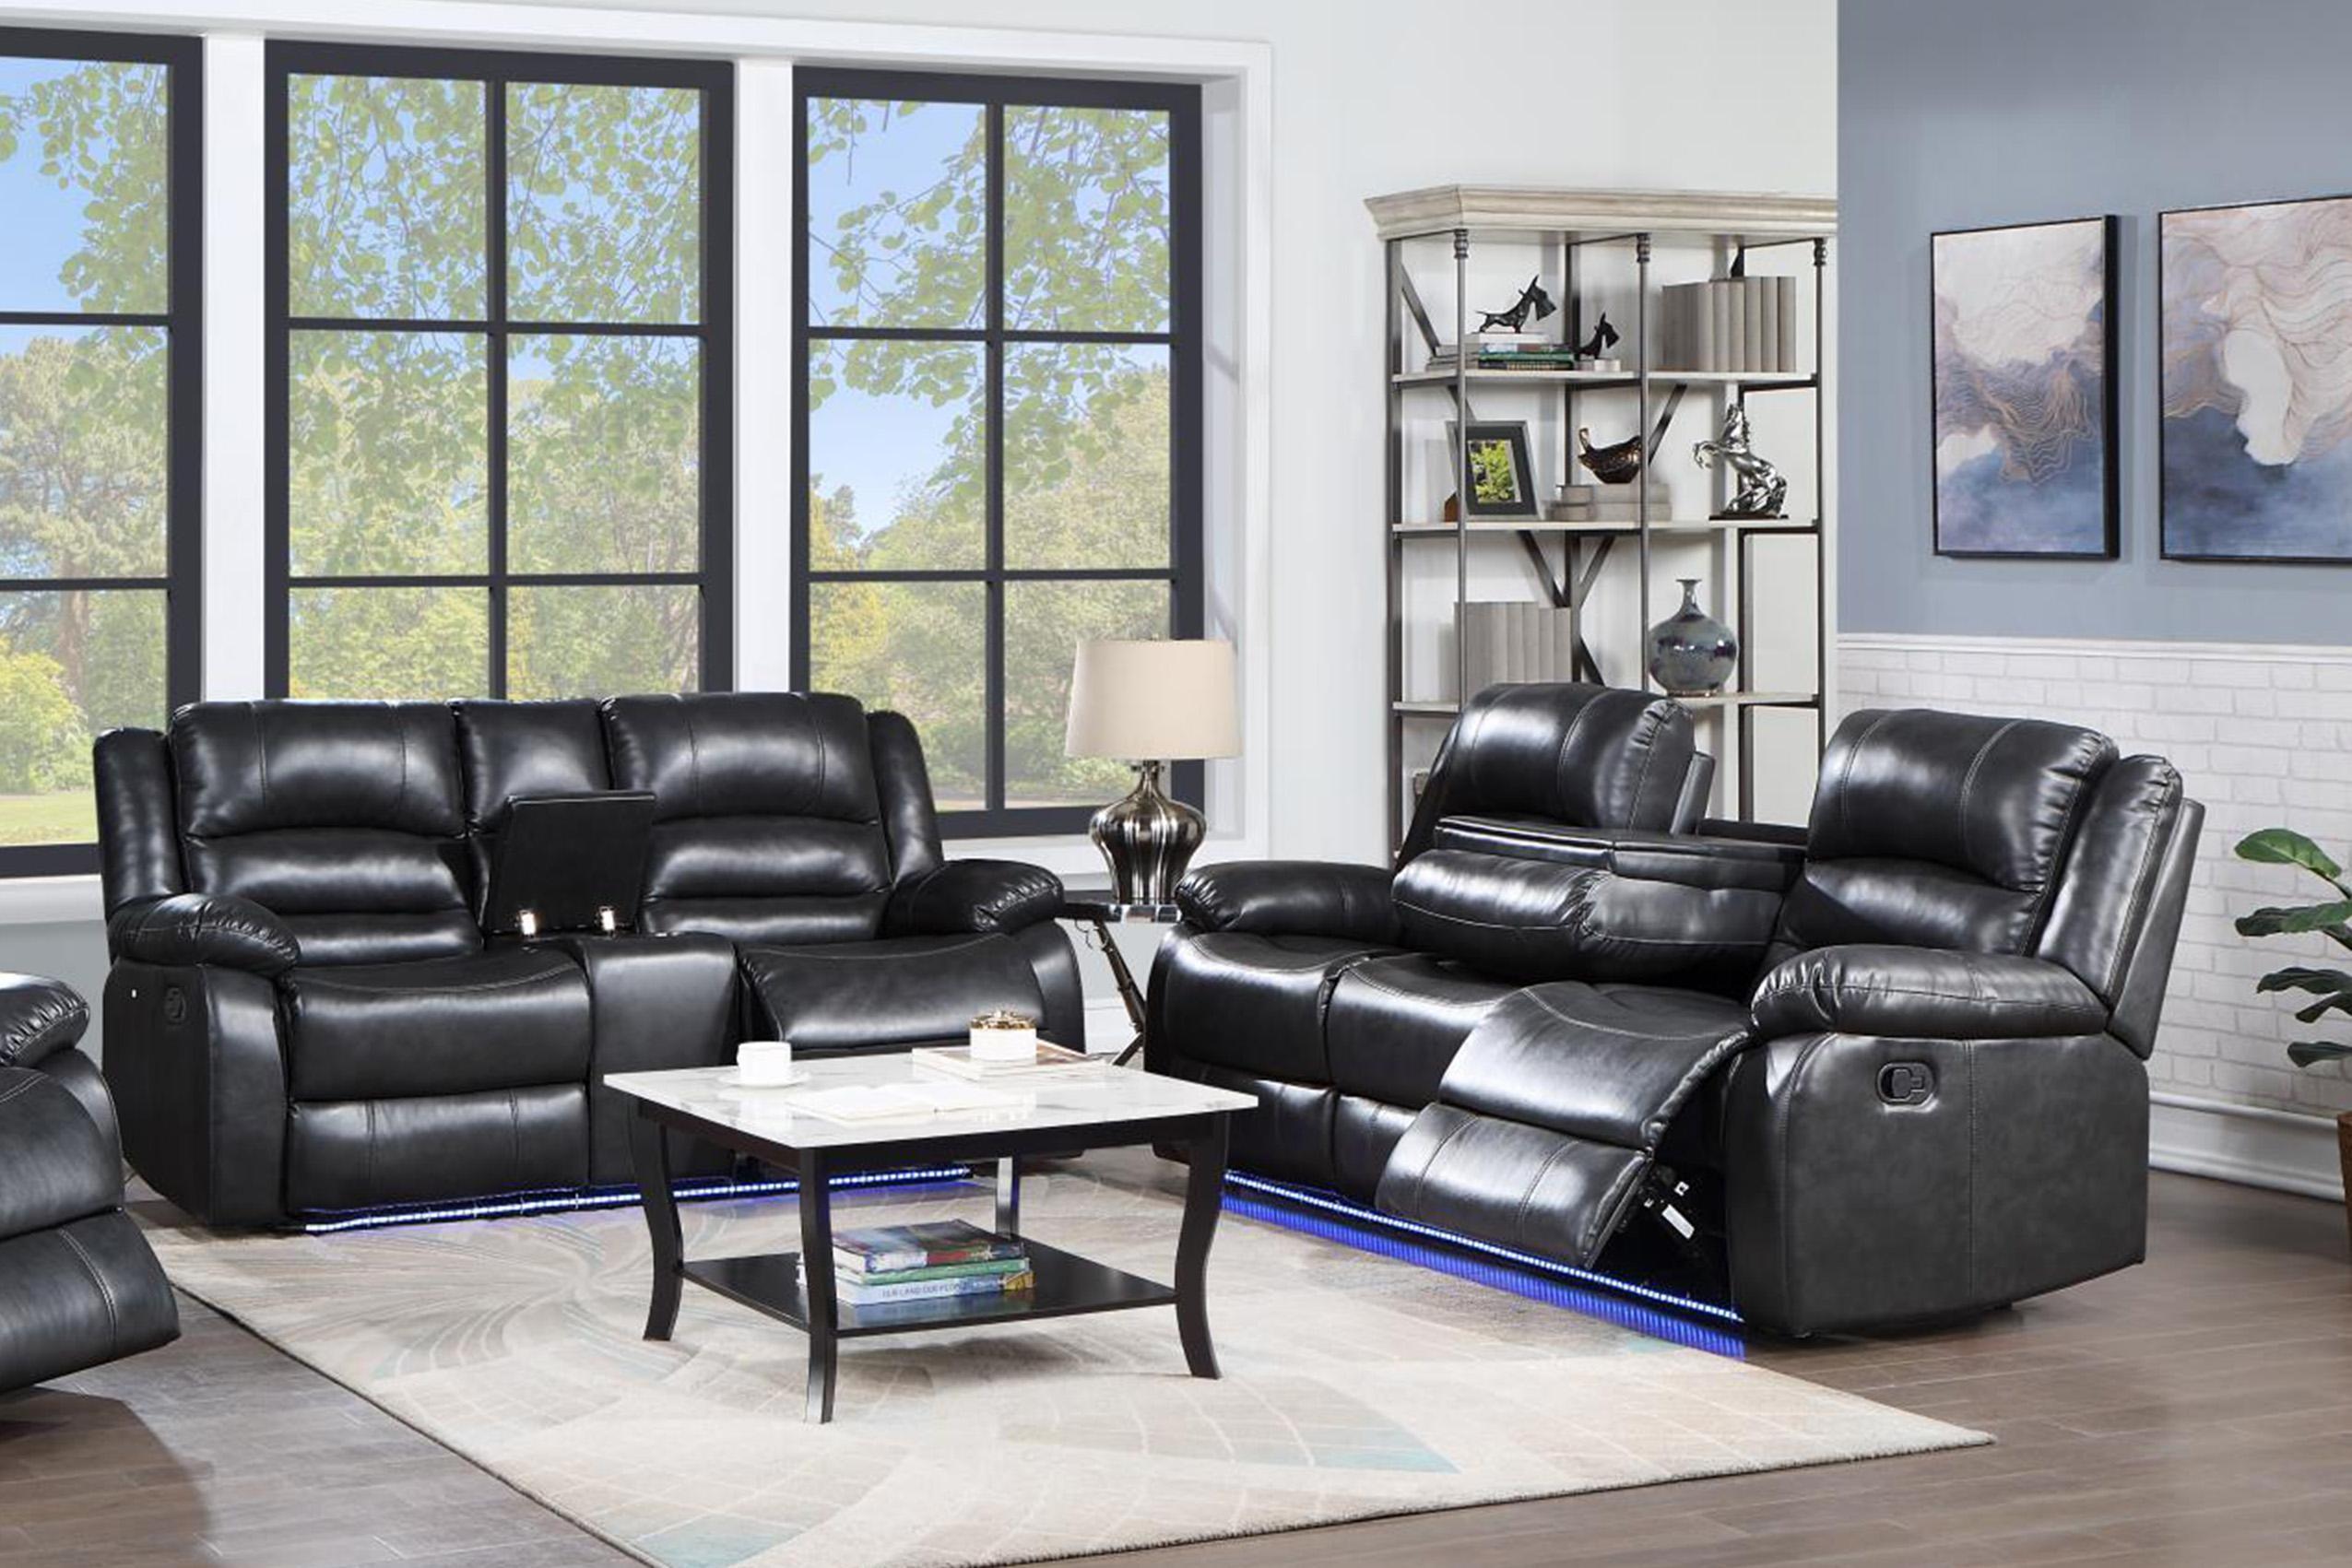 

    
Black Faux Leather Manual Recliner Sofa MARTIN Galaxy Home Contemporary Modern
